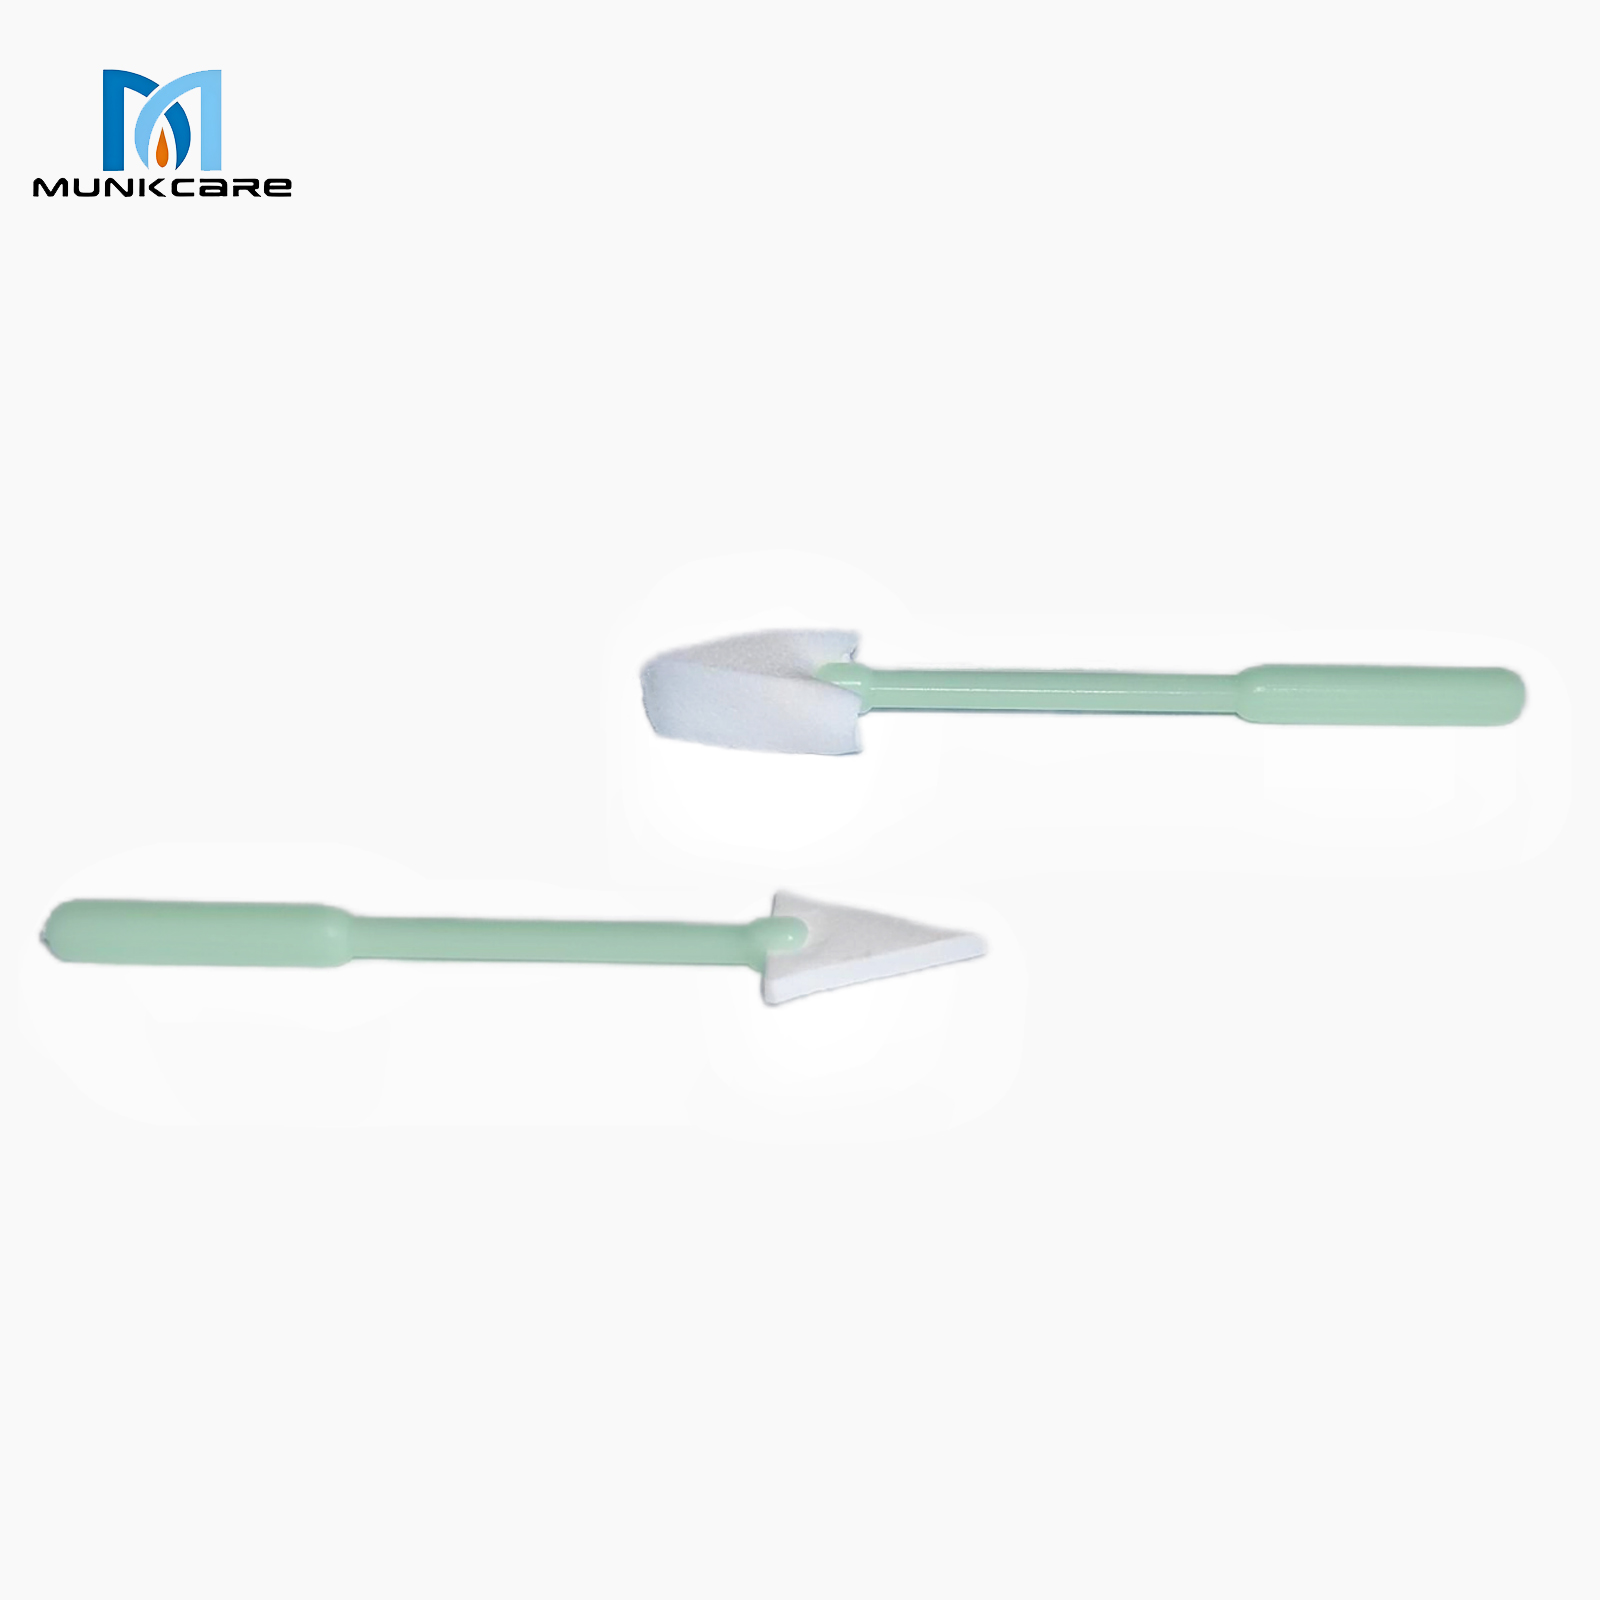 Medical PVA Sponges Surgical Spears Sponge Disposable Ophthalmic Cellulose Sponge Spears Supplier